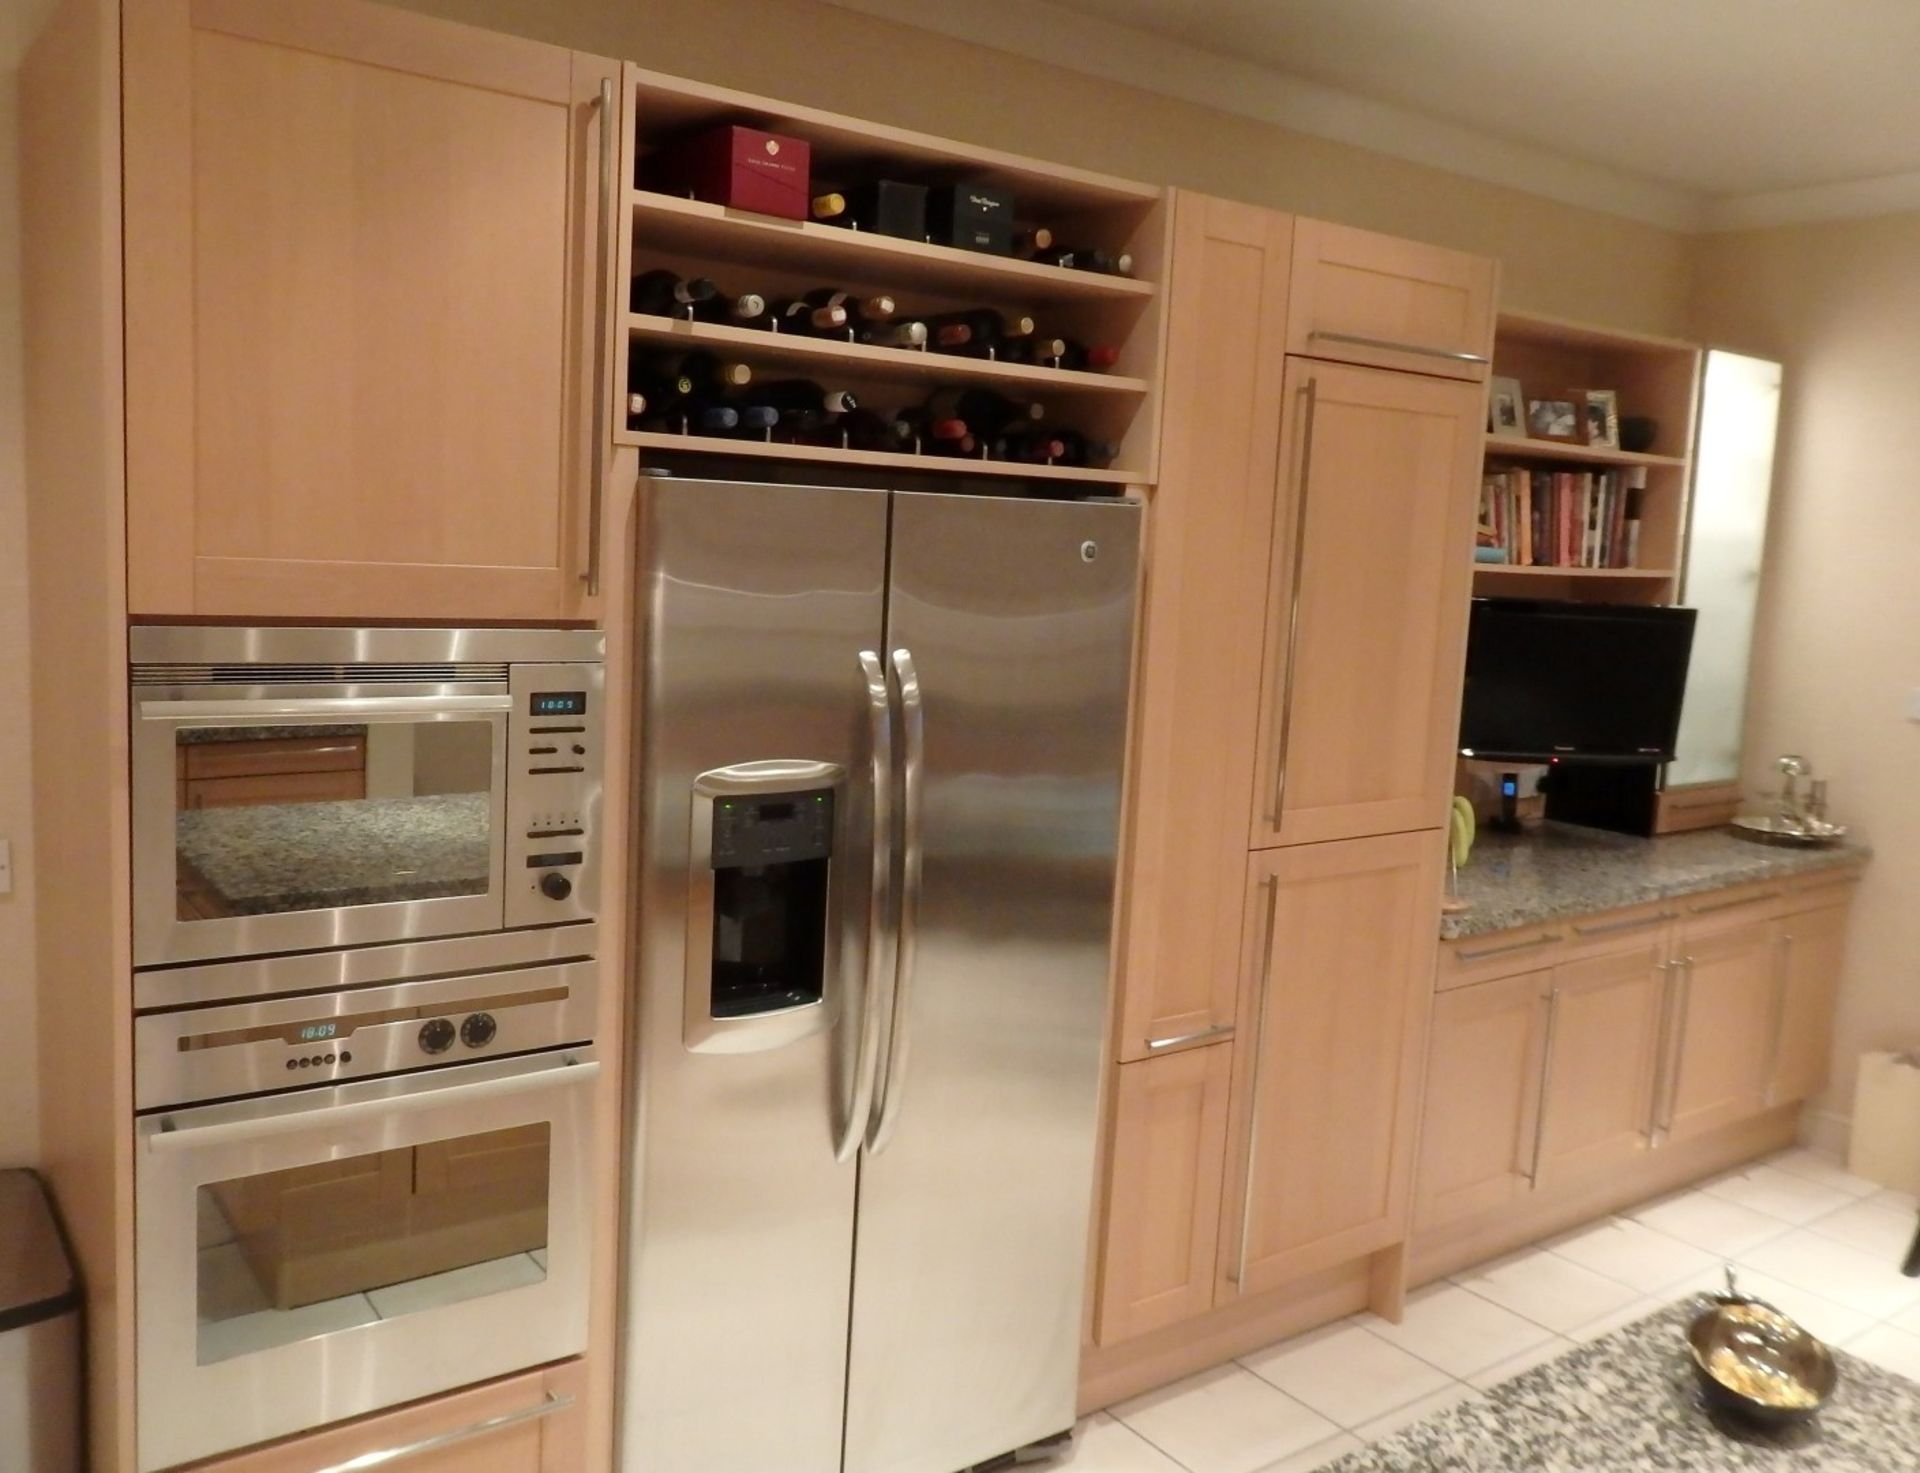 1 x Siematic Fitted Kitchen With Beech Shaker Style Doors, Granite Worktops, Central Island and - Image 92 of 148